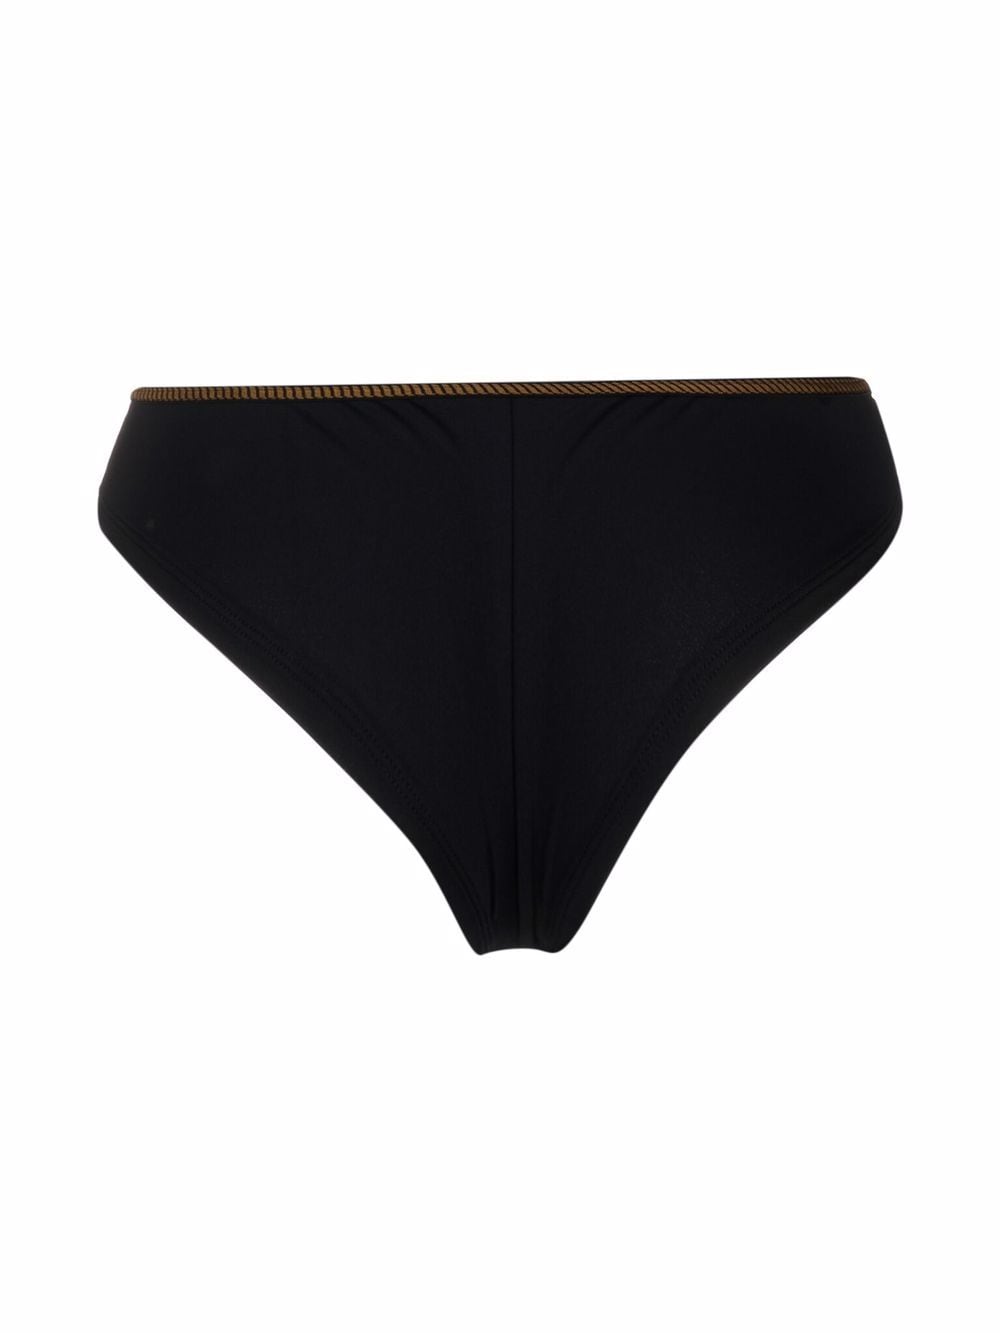 Image 2 of Marlies Dekkers embroidered high-rise bottoms